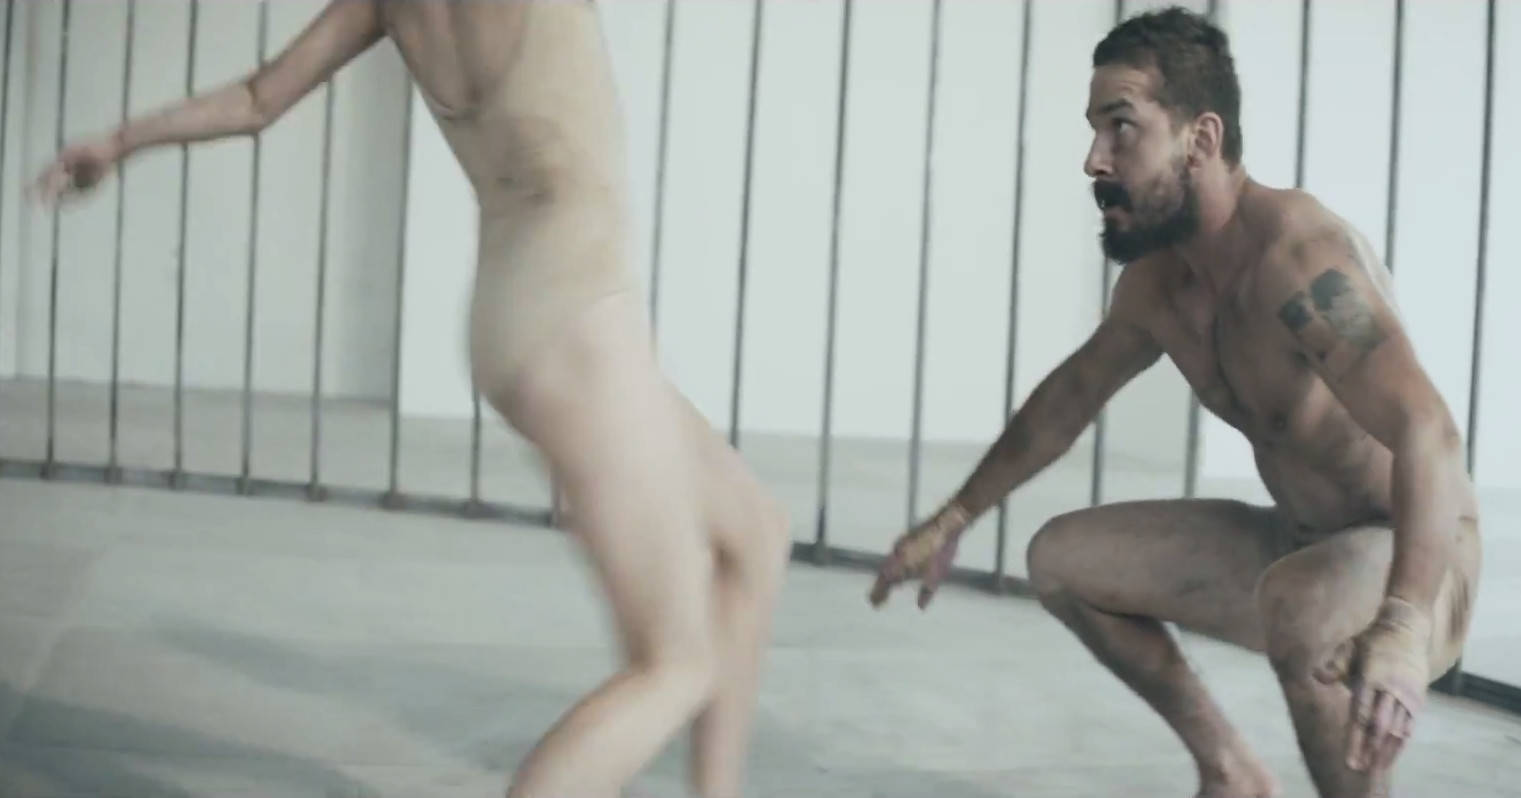 Find a comprehensive list of shia labeoufs nude scenes at mrman. 